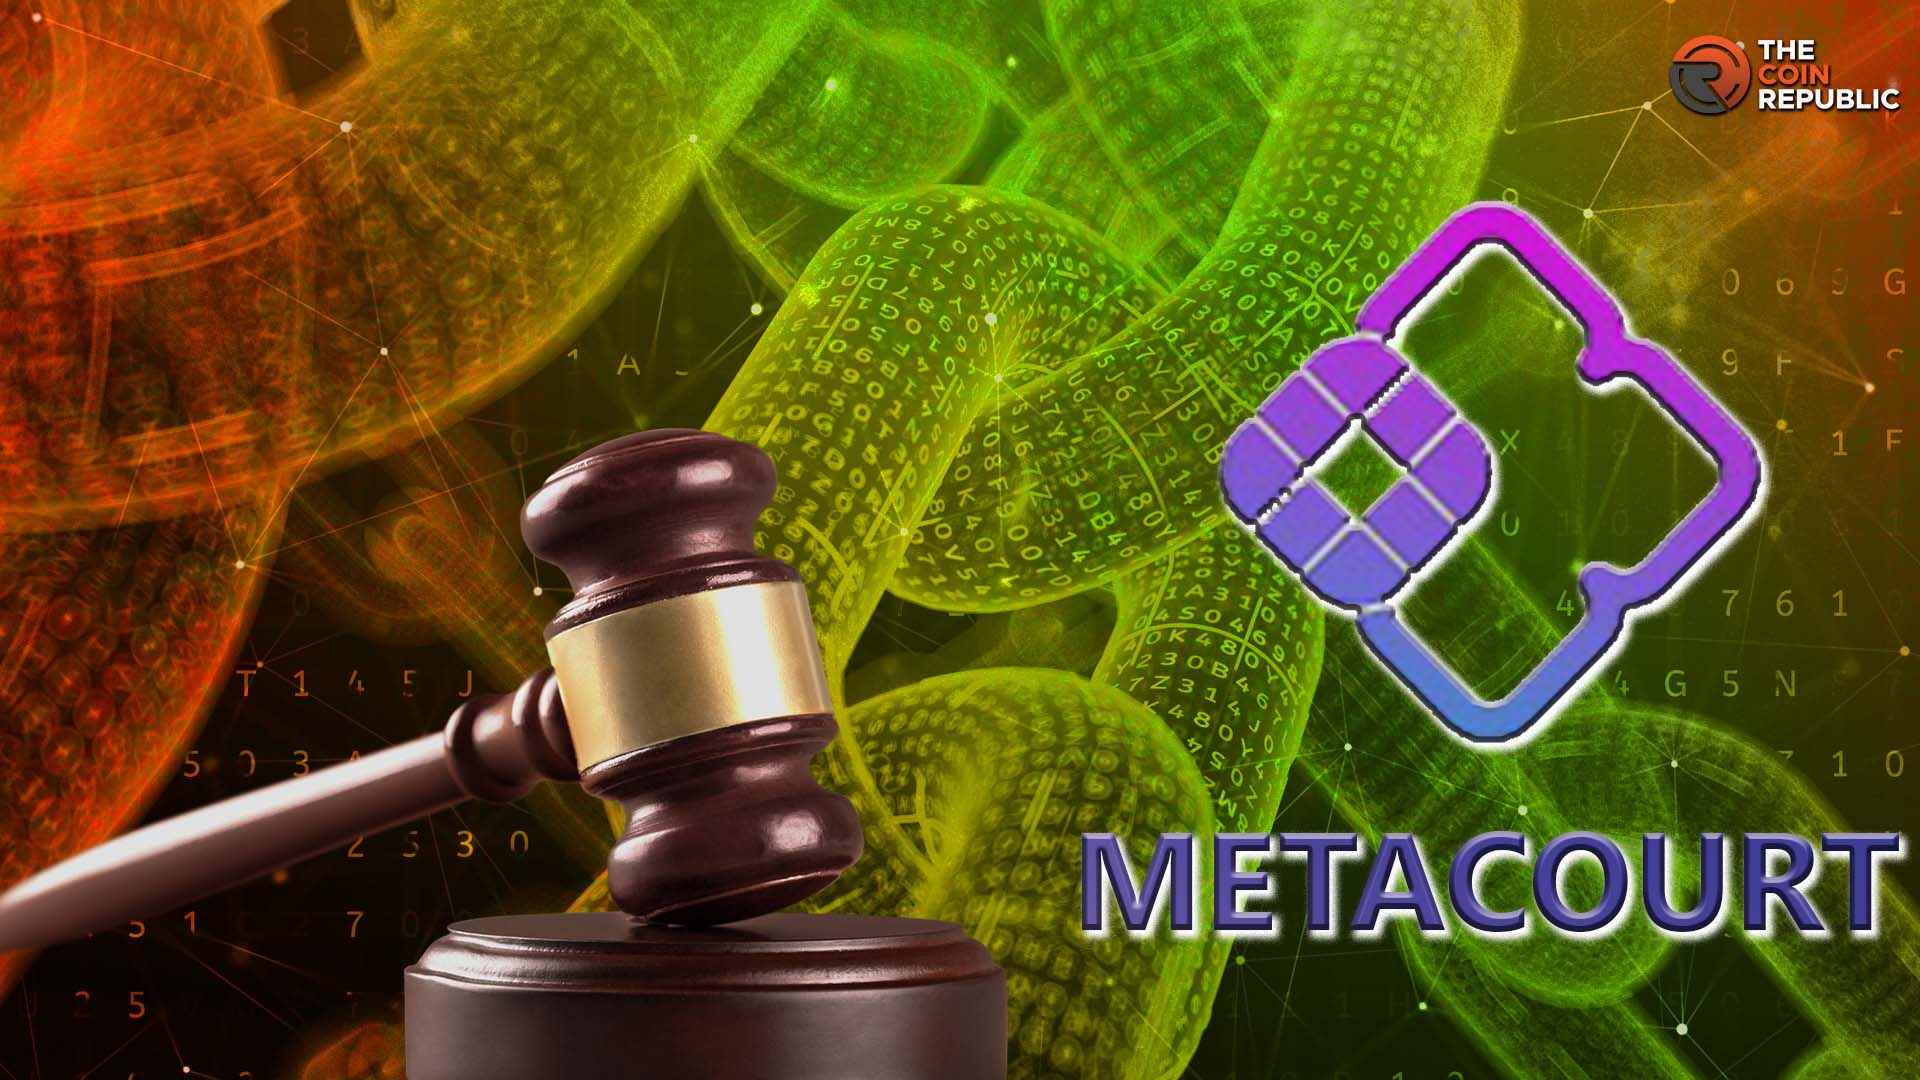 Metacourt Paves the Way For an Affordable On-chain Legal System